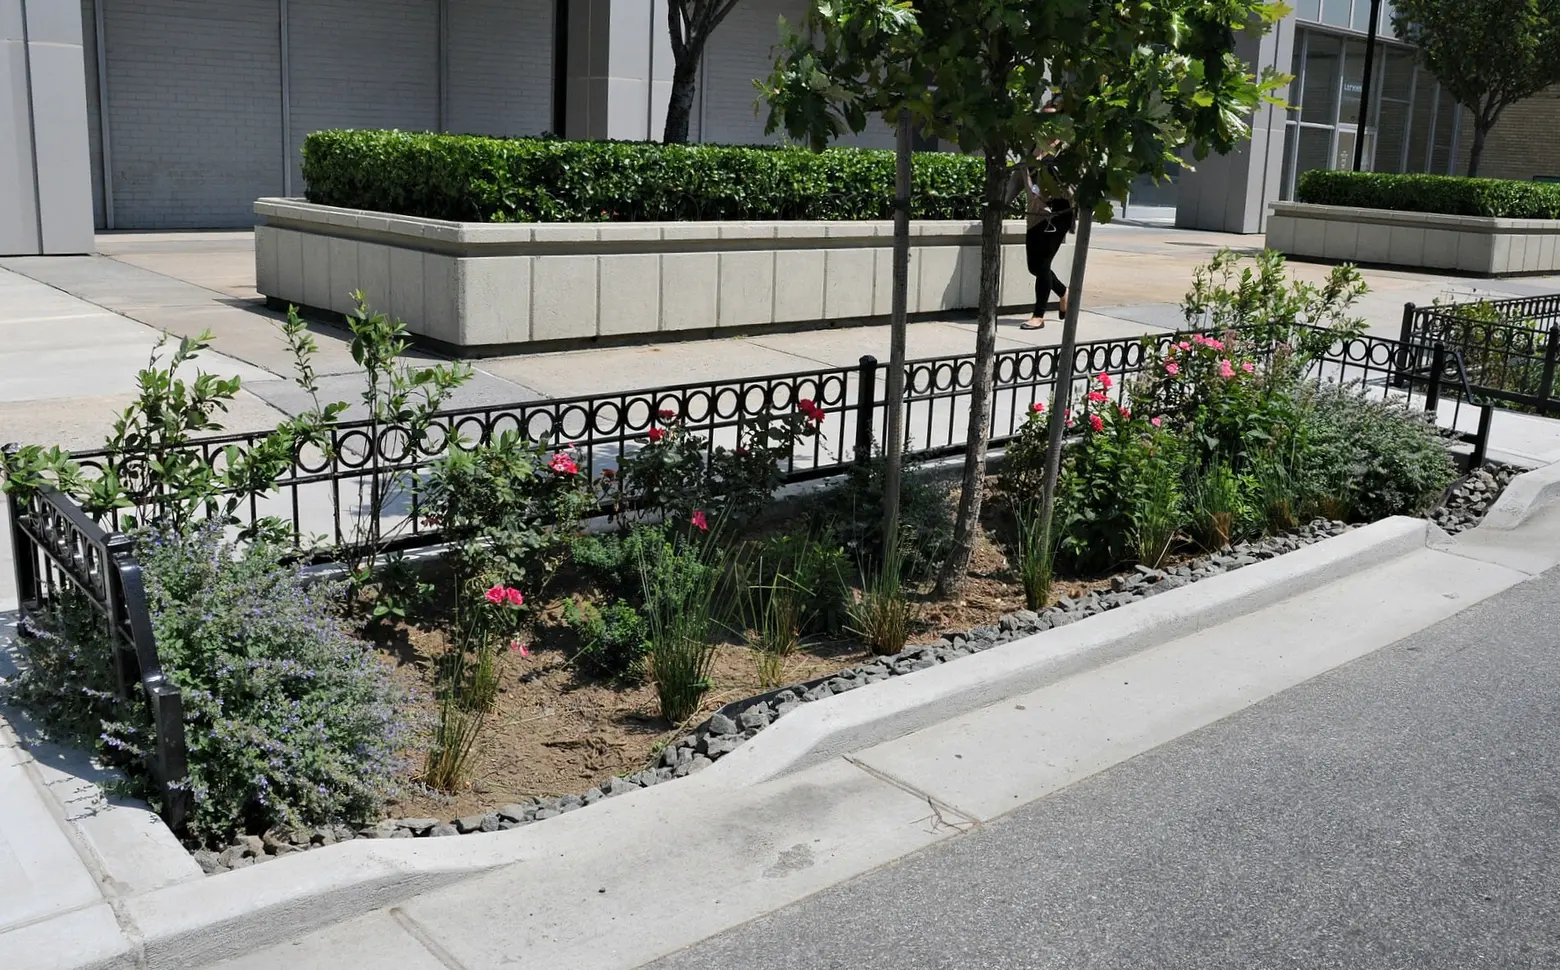 Bioswales face backlash from city residents for being eyesores